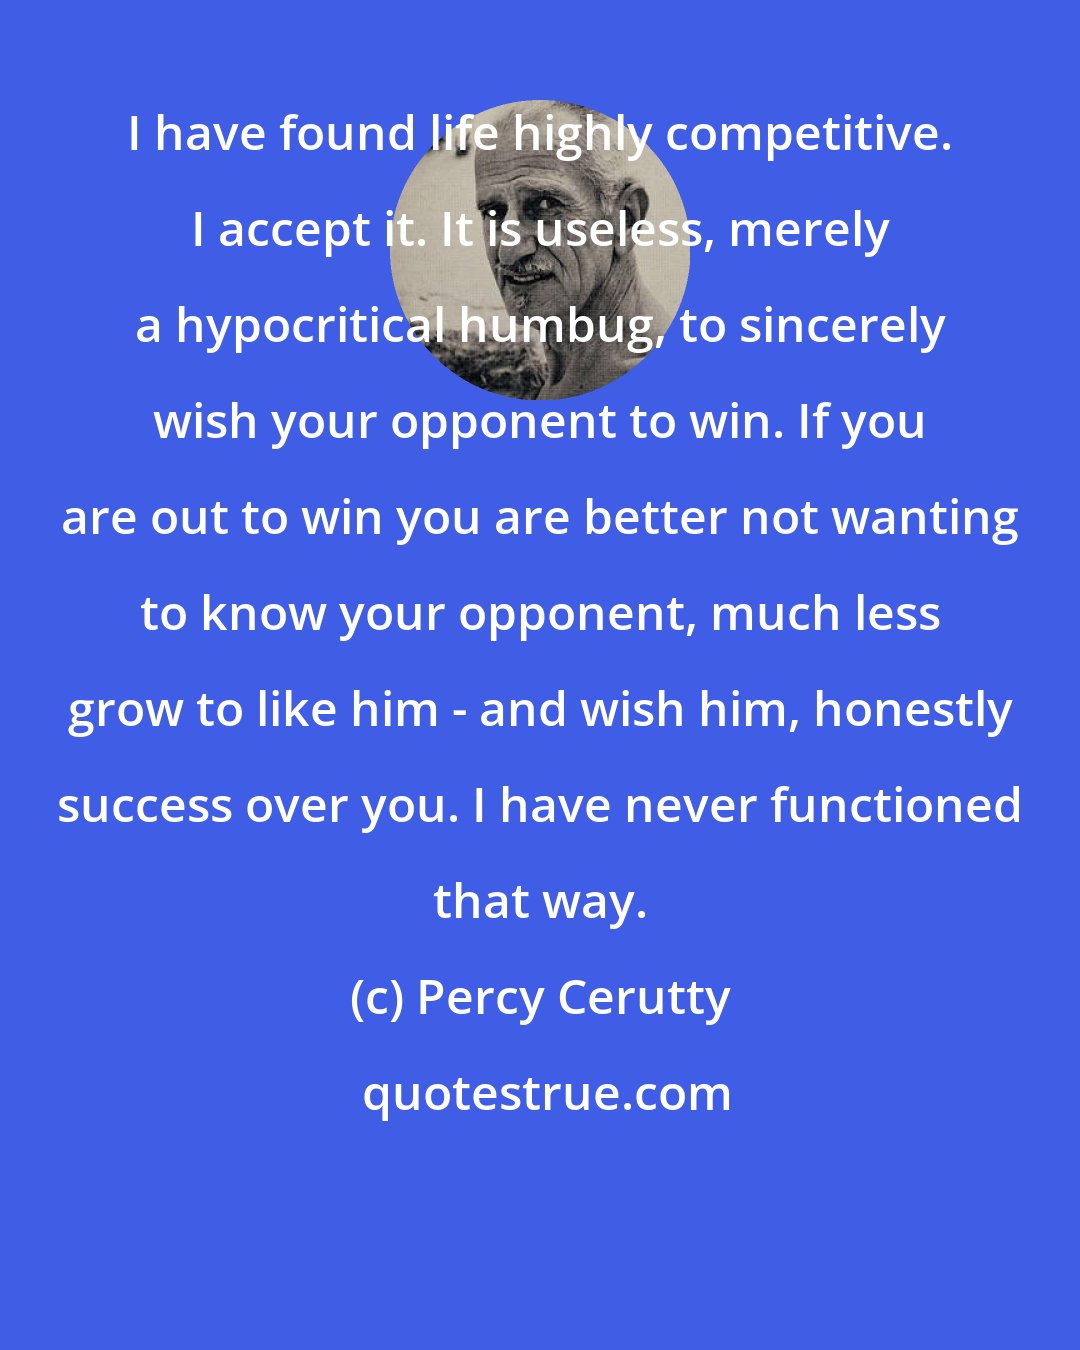 Percy Cerutty: I have found life highly competitive. I accept it. It is useless, merely a hypocritical humbug, to sincerely wish your opponent to win. If you are out to win you are better not wanting to know your opponent, much less grow to like him - and wish him, honestly success over you. I have never functioned that way.